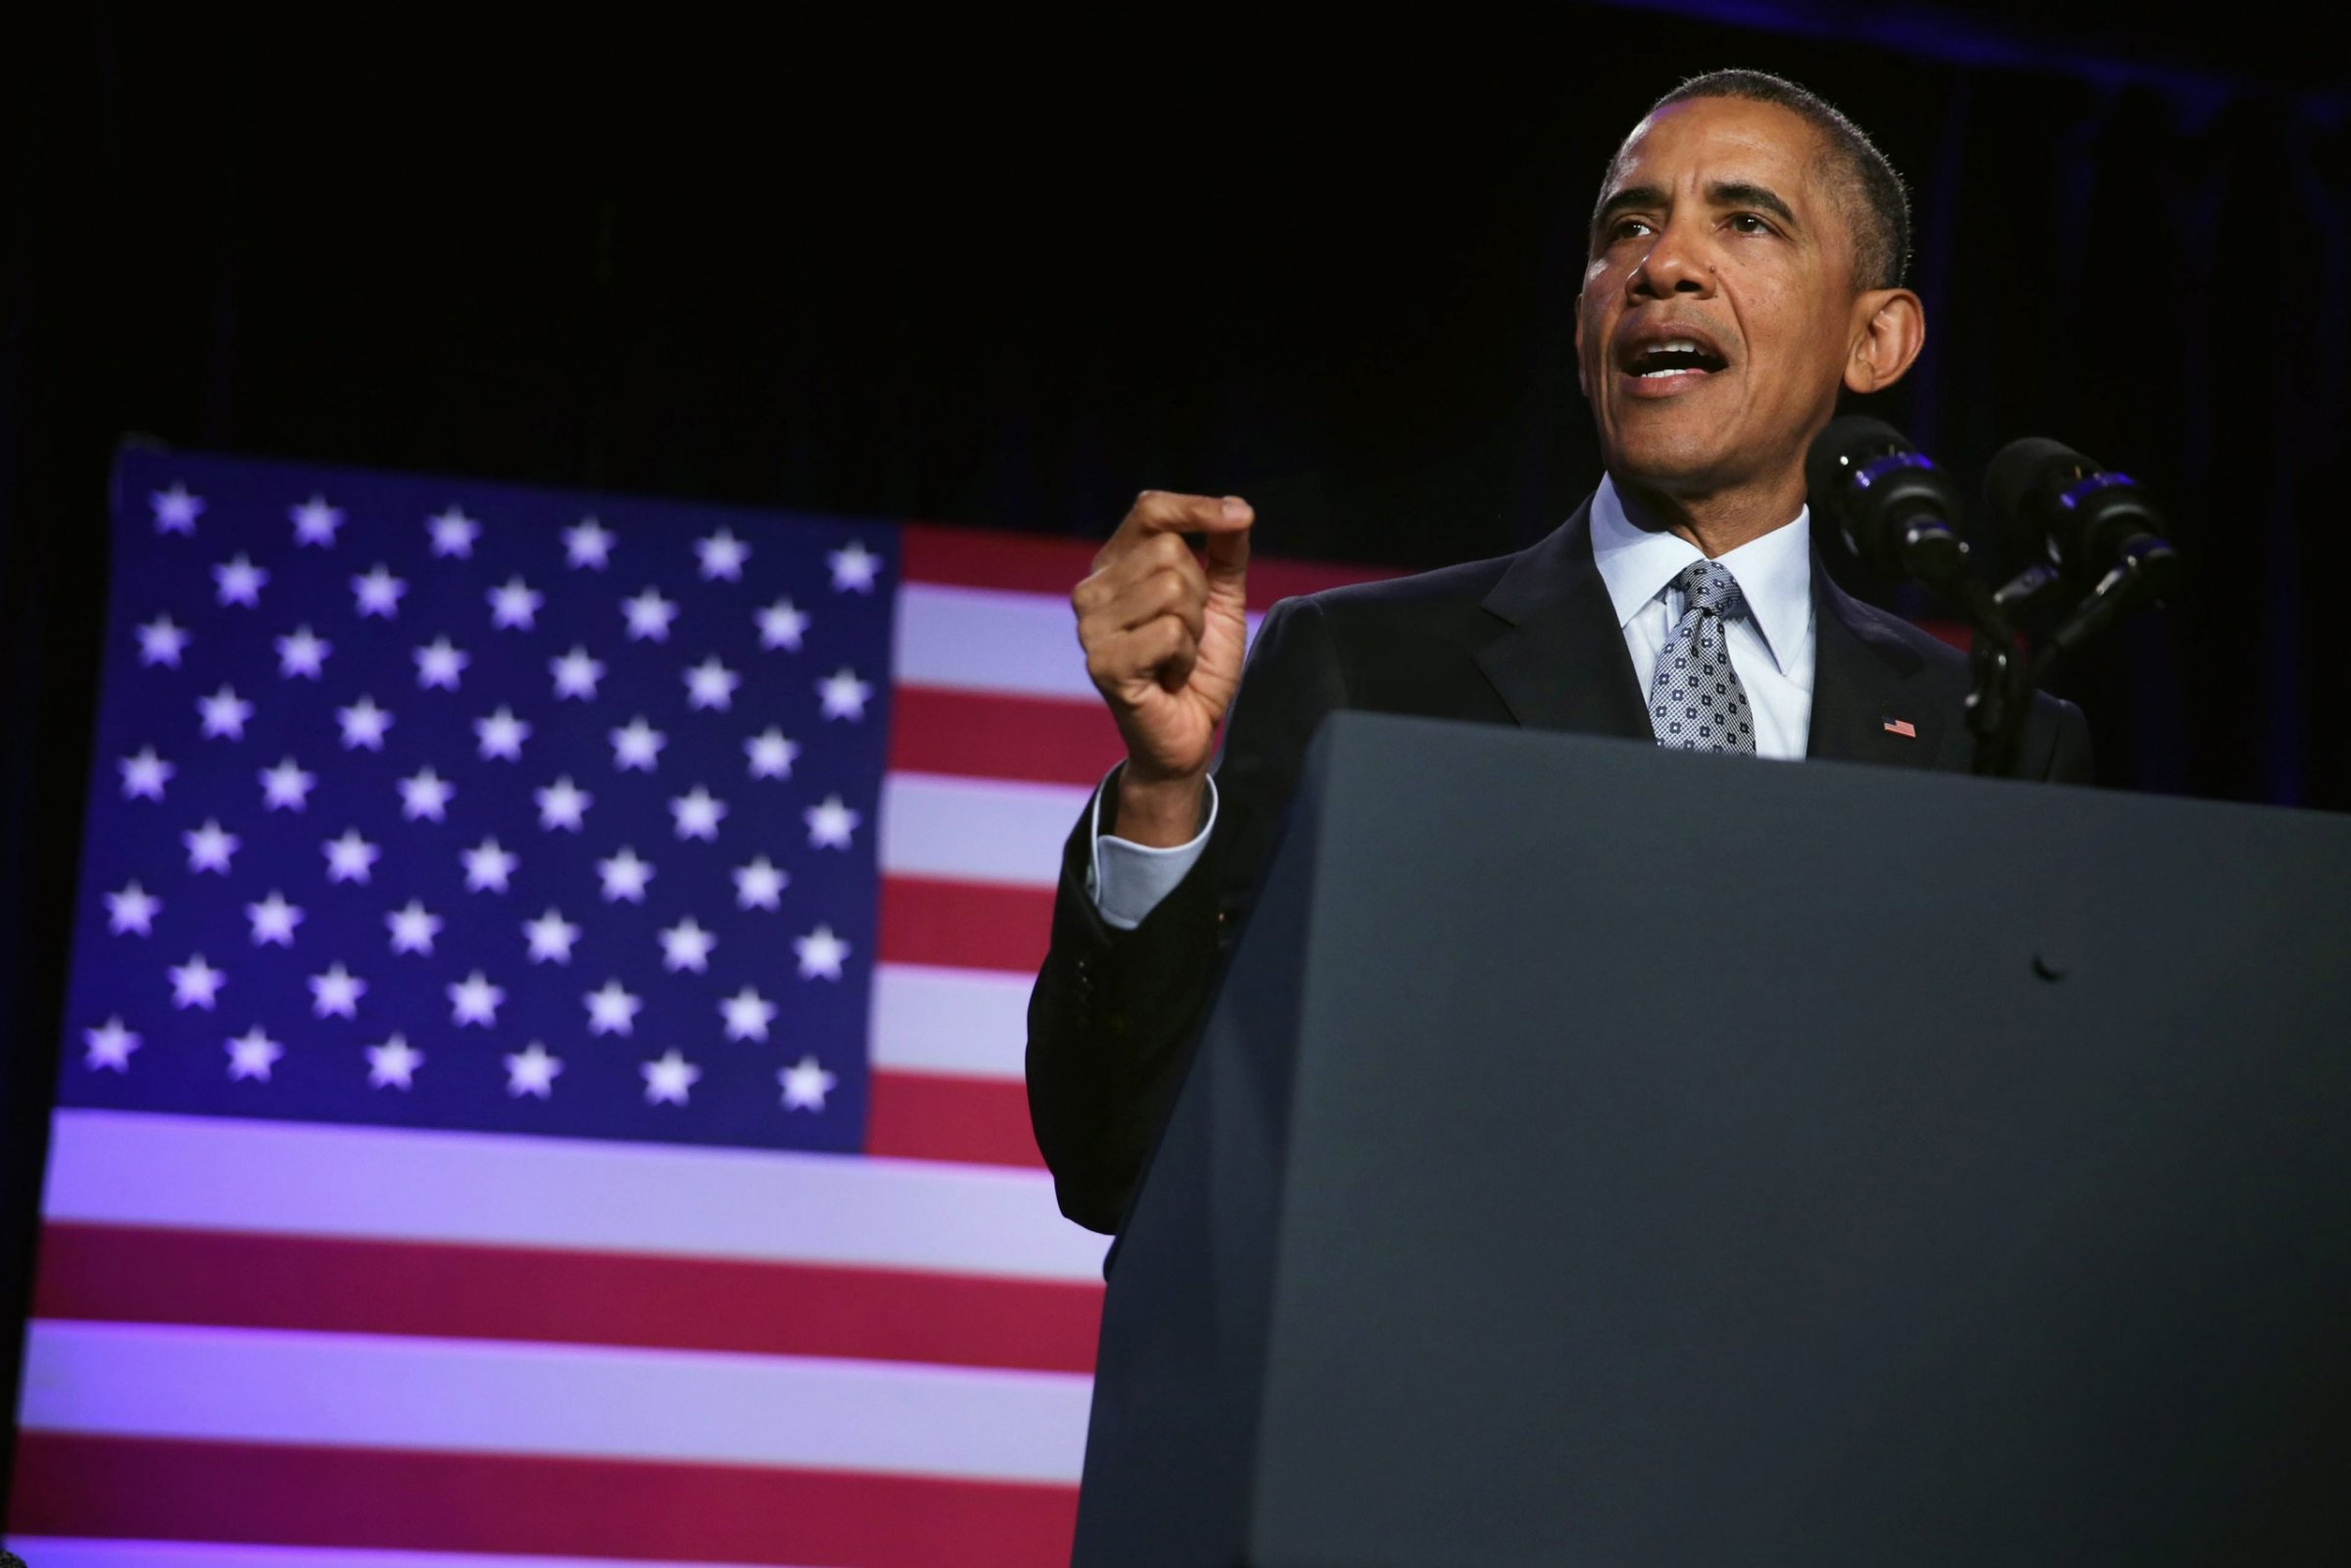 US President Barack Obama speaks during the General Session of the 2015 DNC Winter Meeting in Washington, D.C., on Feb. 20, 2015.